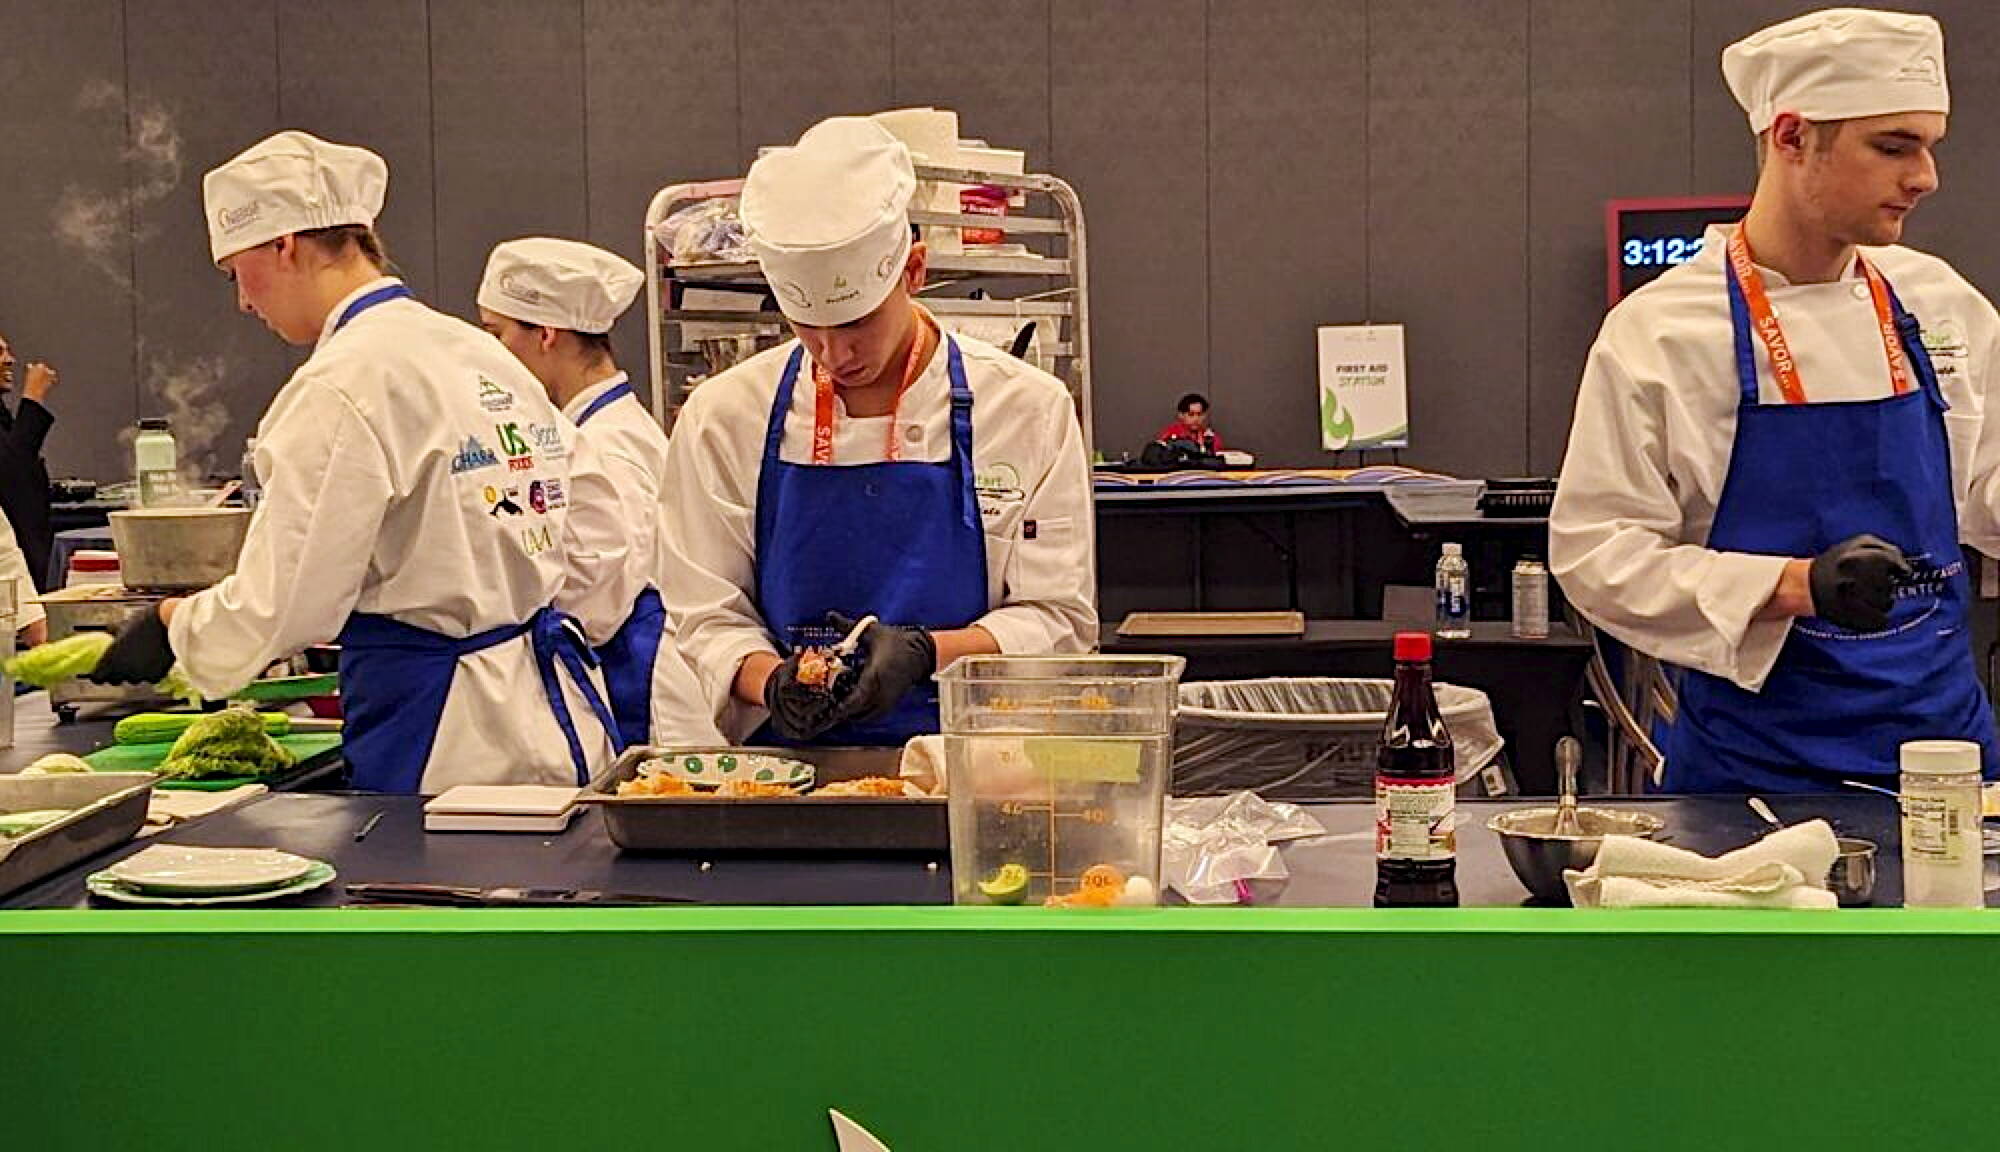 Members of the Thunder Mountain High School culinary arts team prepare their three-course meal during the National ProStart Invitational in Baltimore on April 26-28. (Photo by Rebecca Giedosh-Ruge)